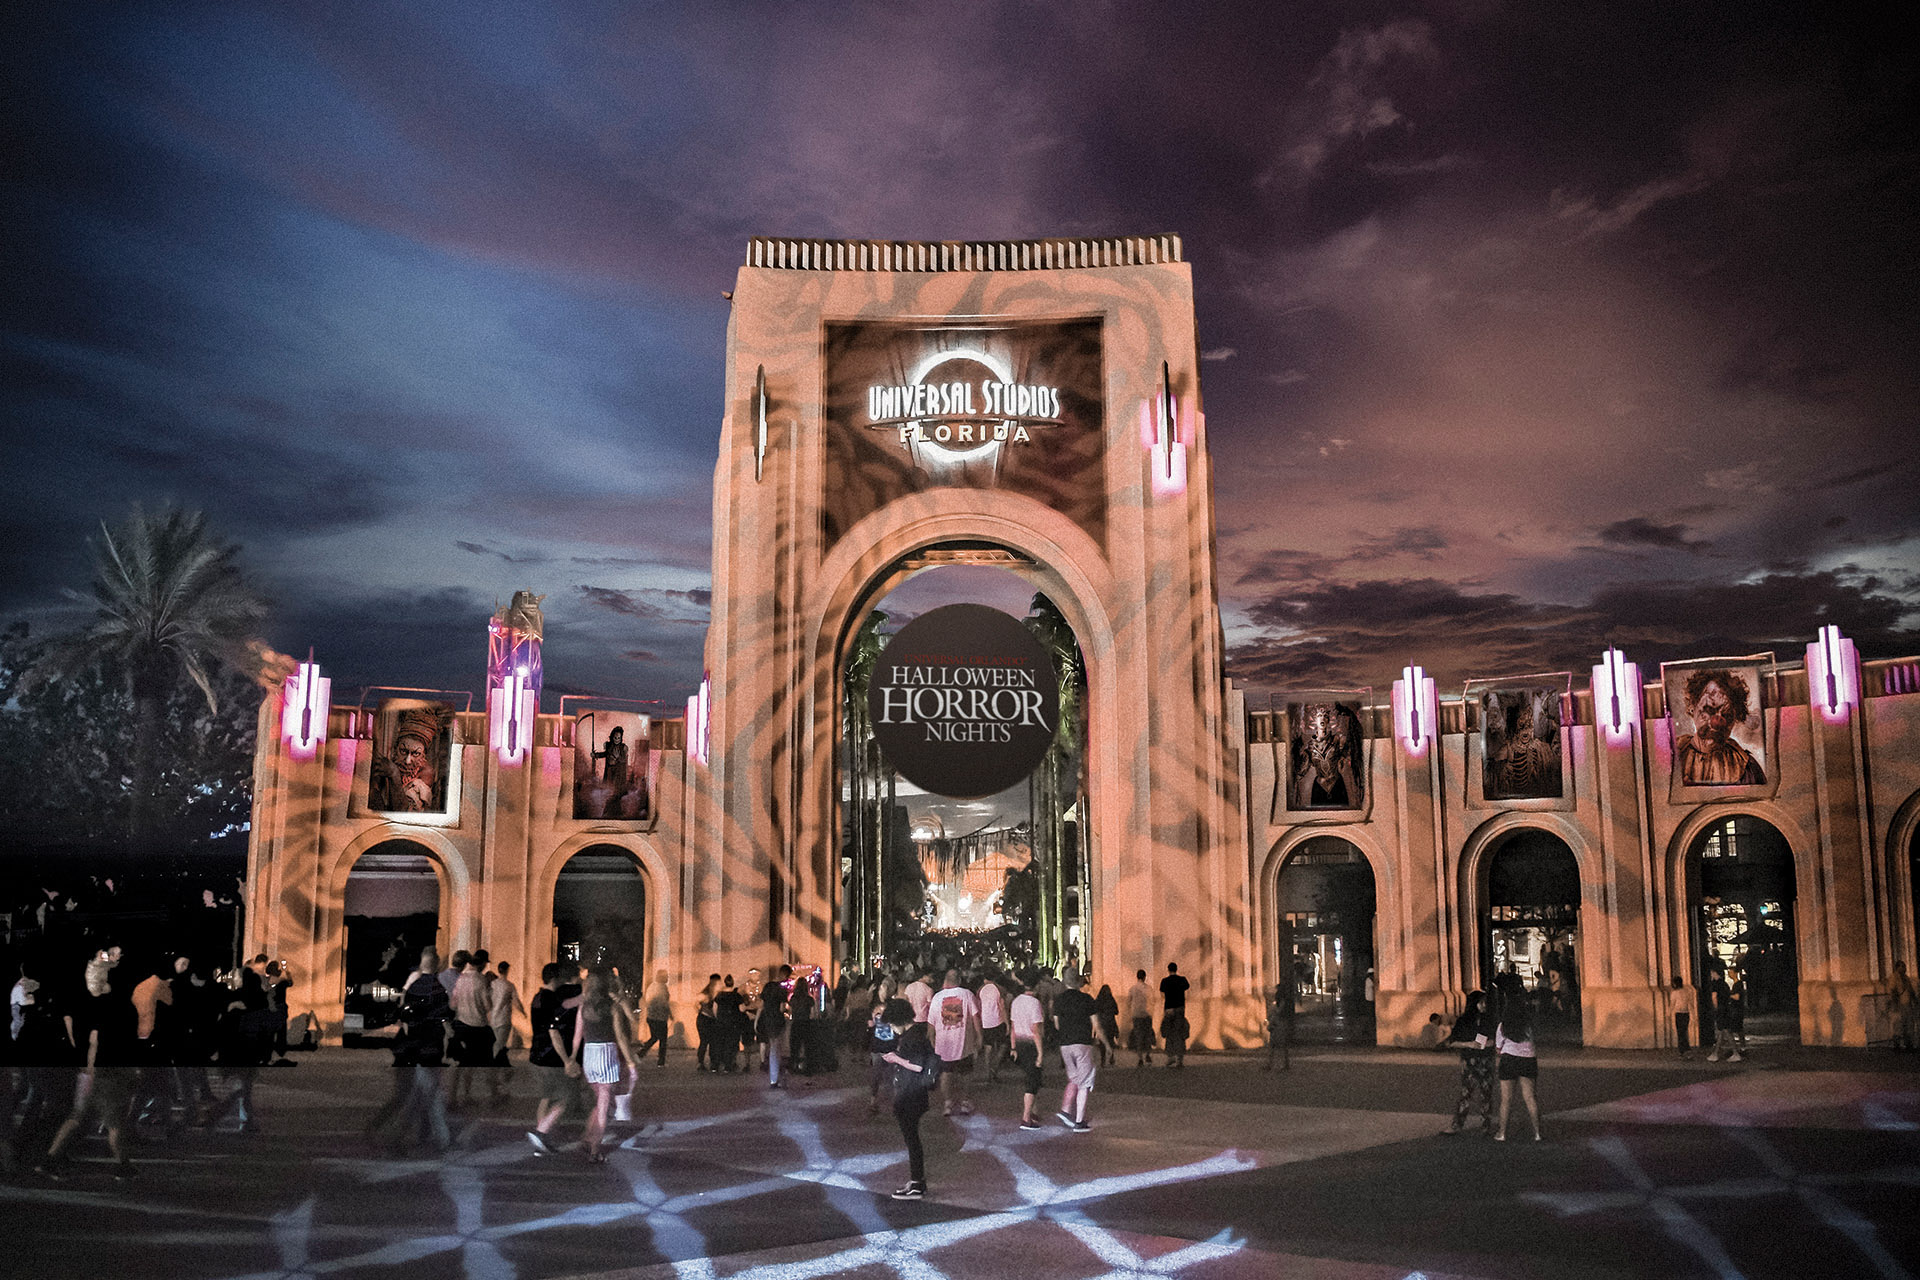 Insider's guide to Halloween Horror Nights 2021 extras, Express Passes